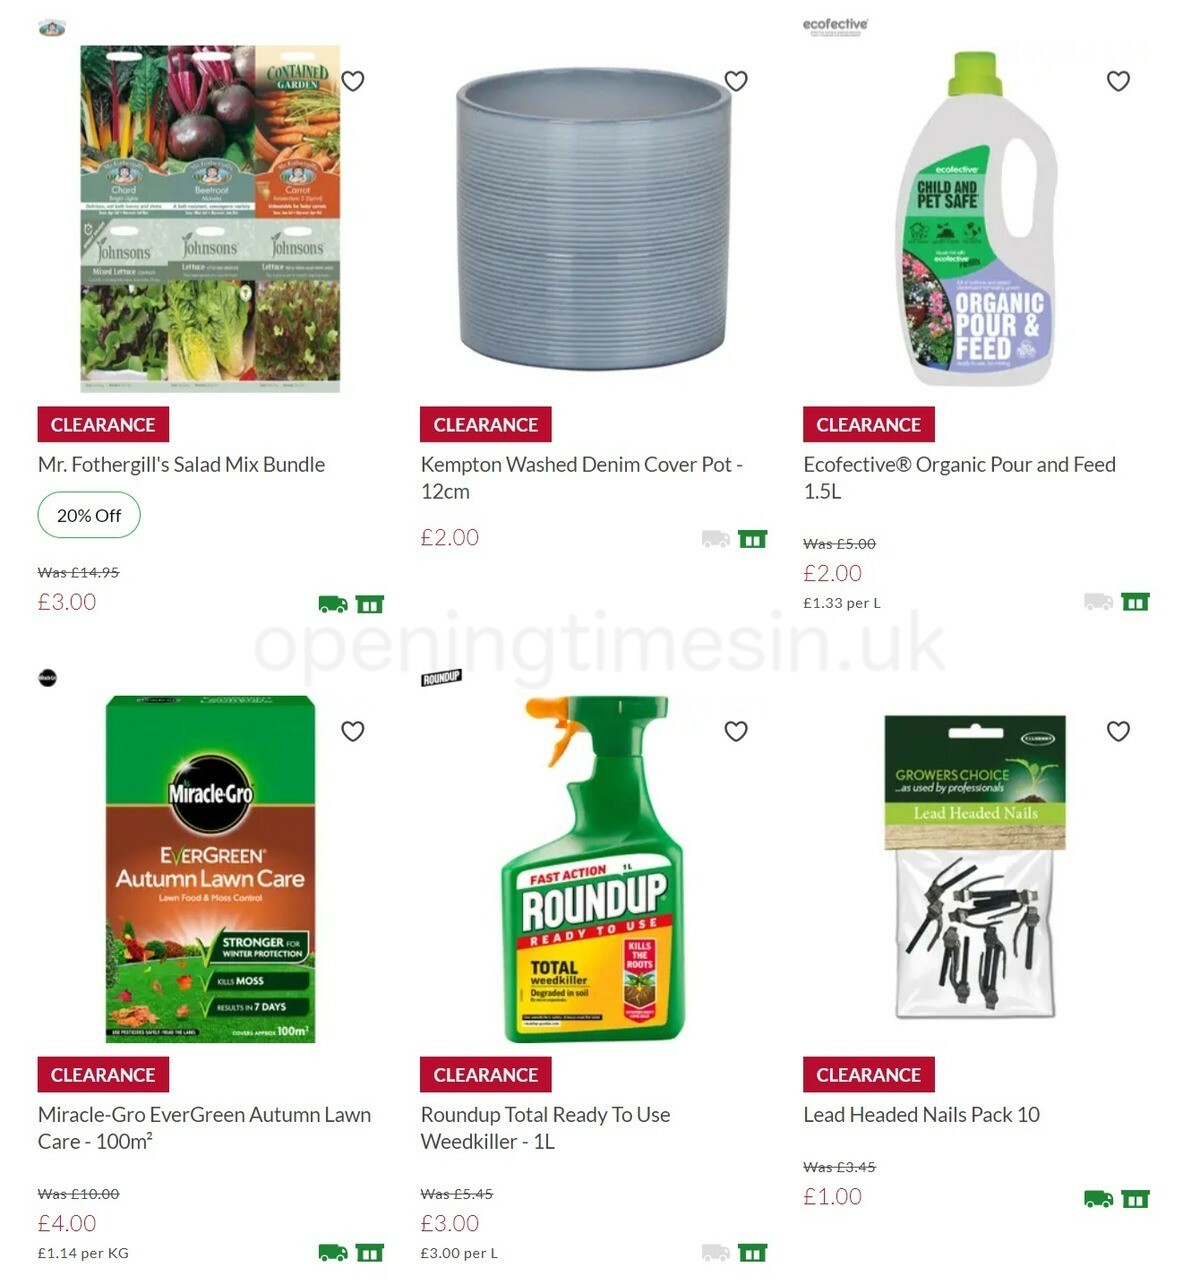 Homebase Offers from 8 April